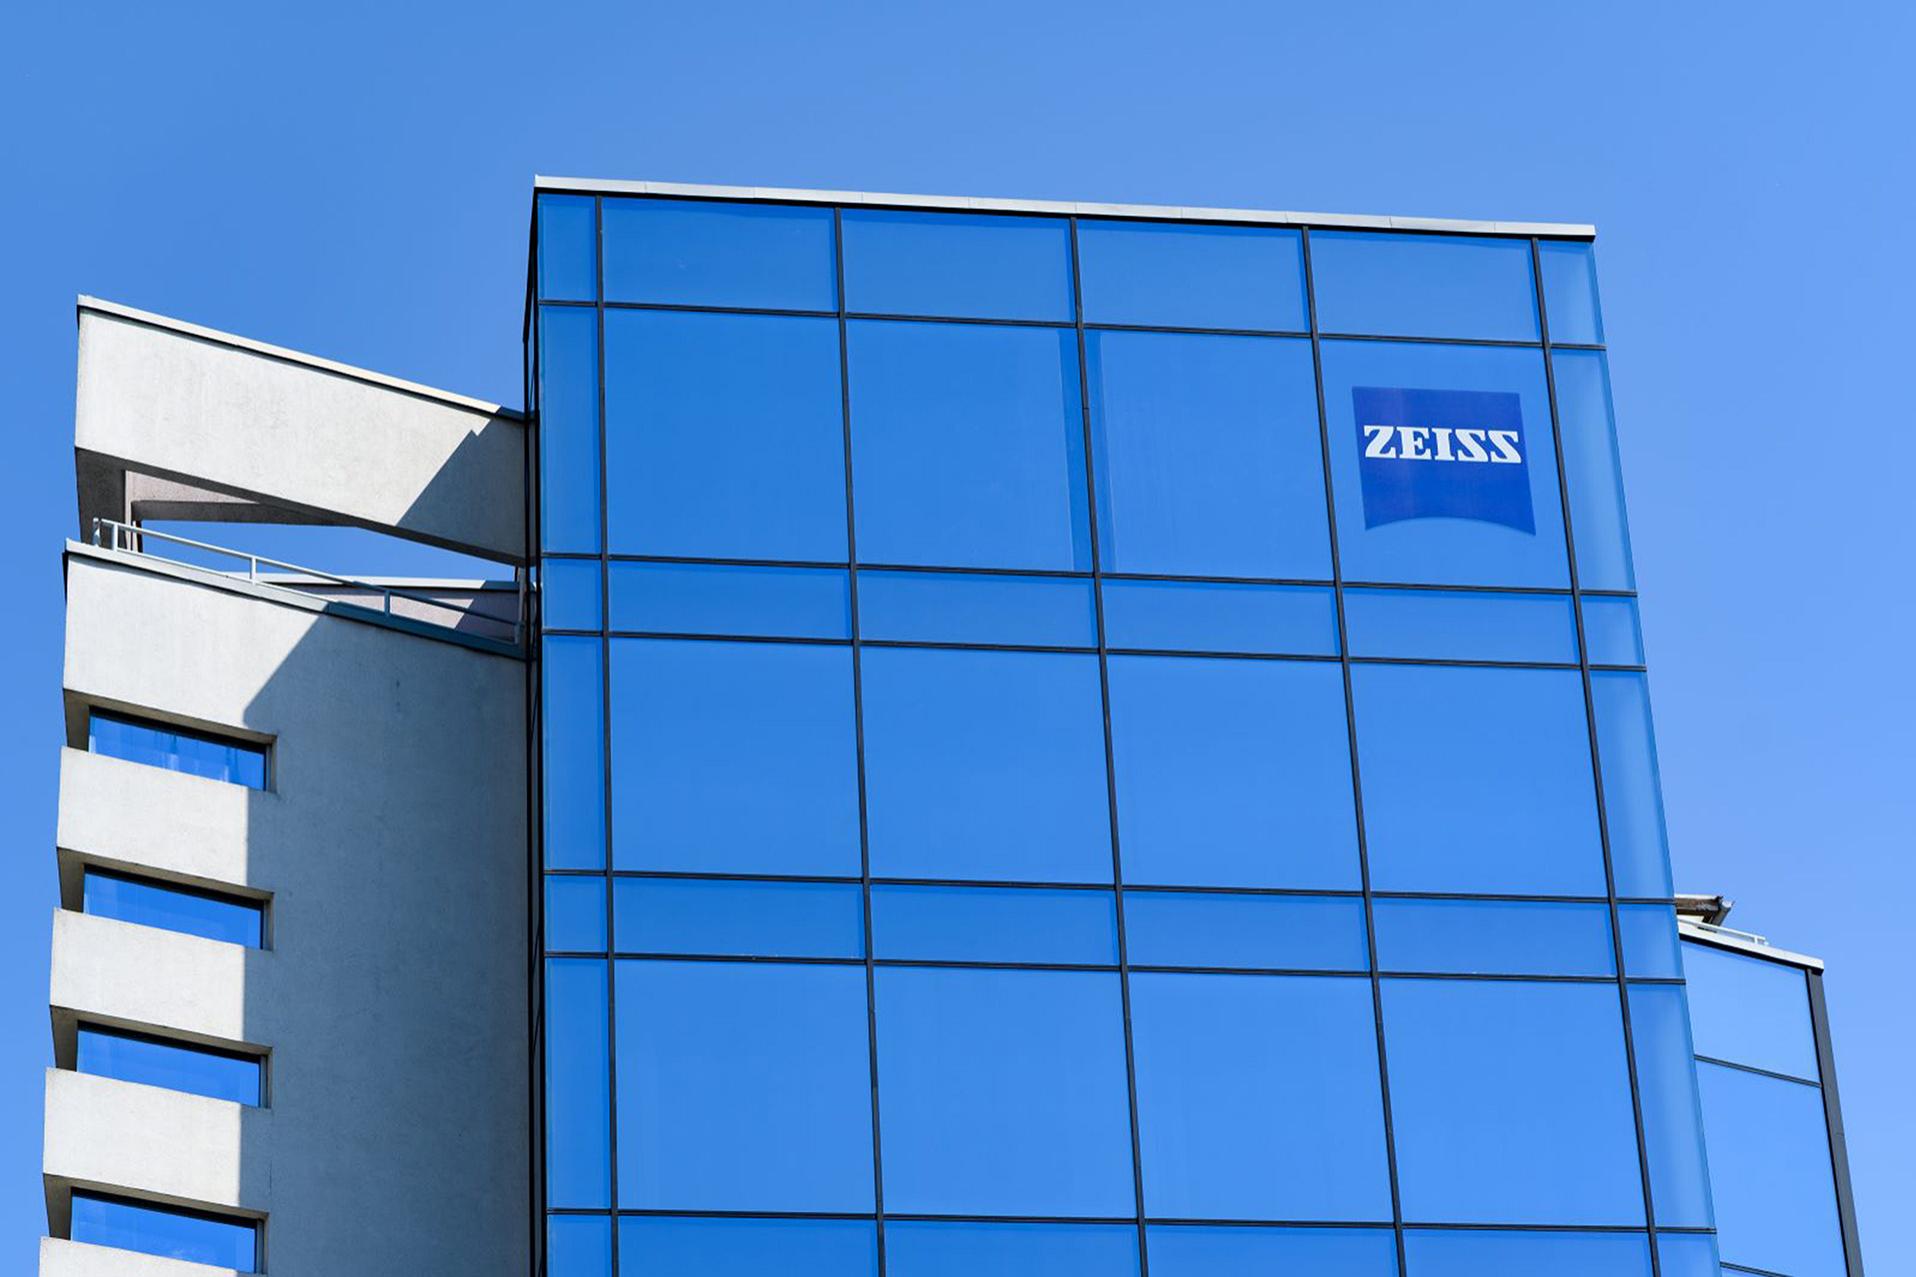 With the acquisition of ETEO Software Factory Kft., a software development company based in Miskolc and Budapest (Hungary), ZEISS Digital Innovation (ZDI) is setting the course for further growth.